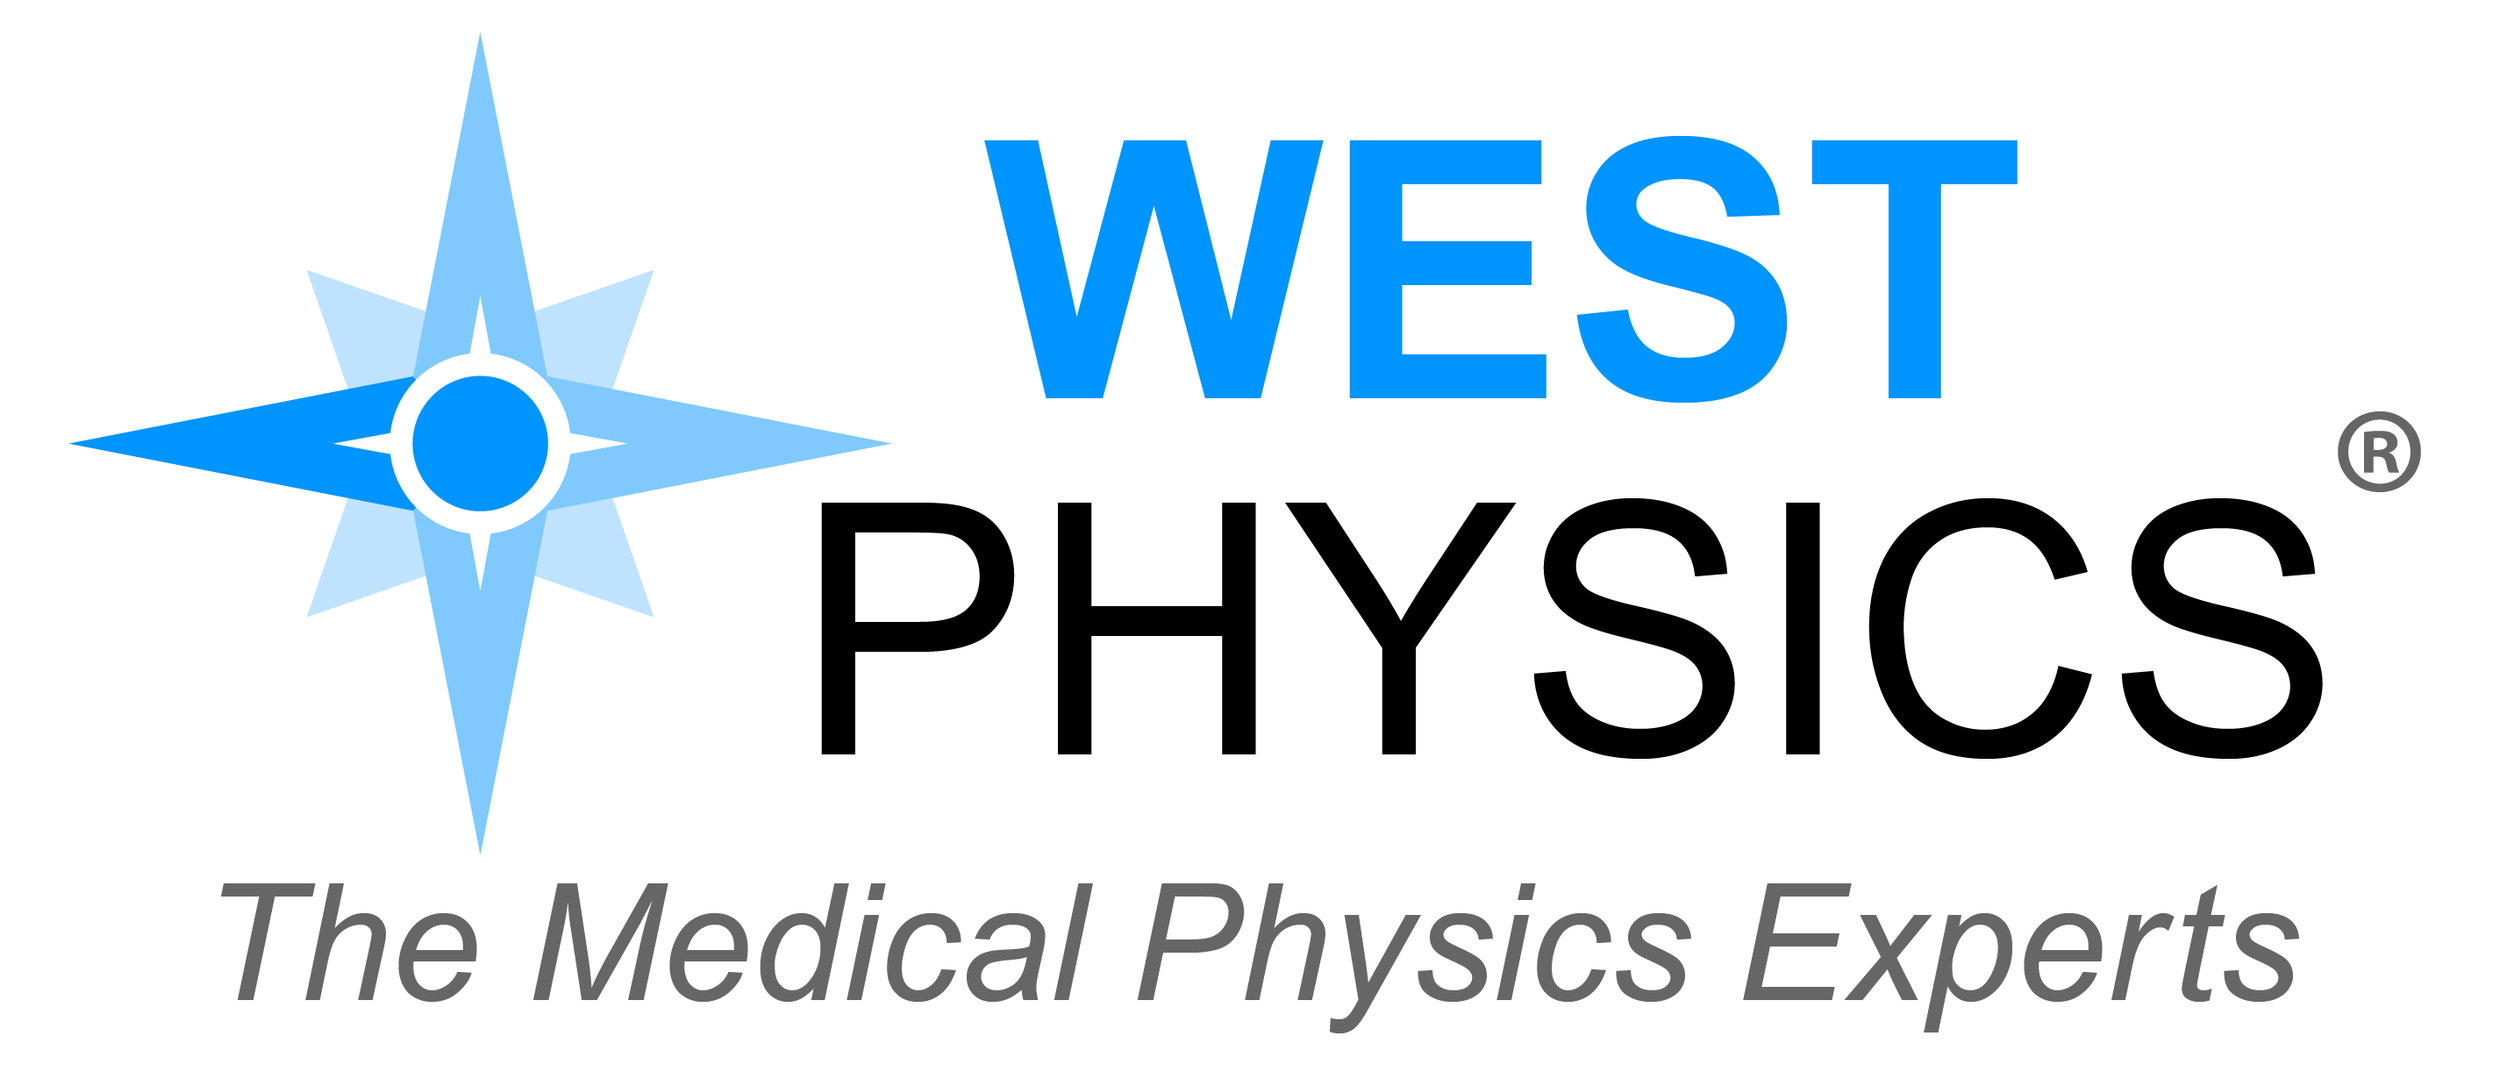 West Physics Logo Color on White Background - Stacked w Tag Line.jpg